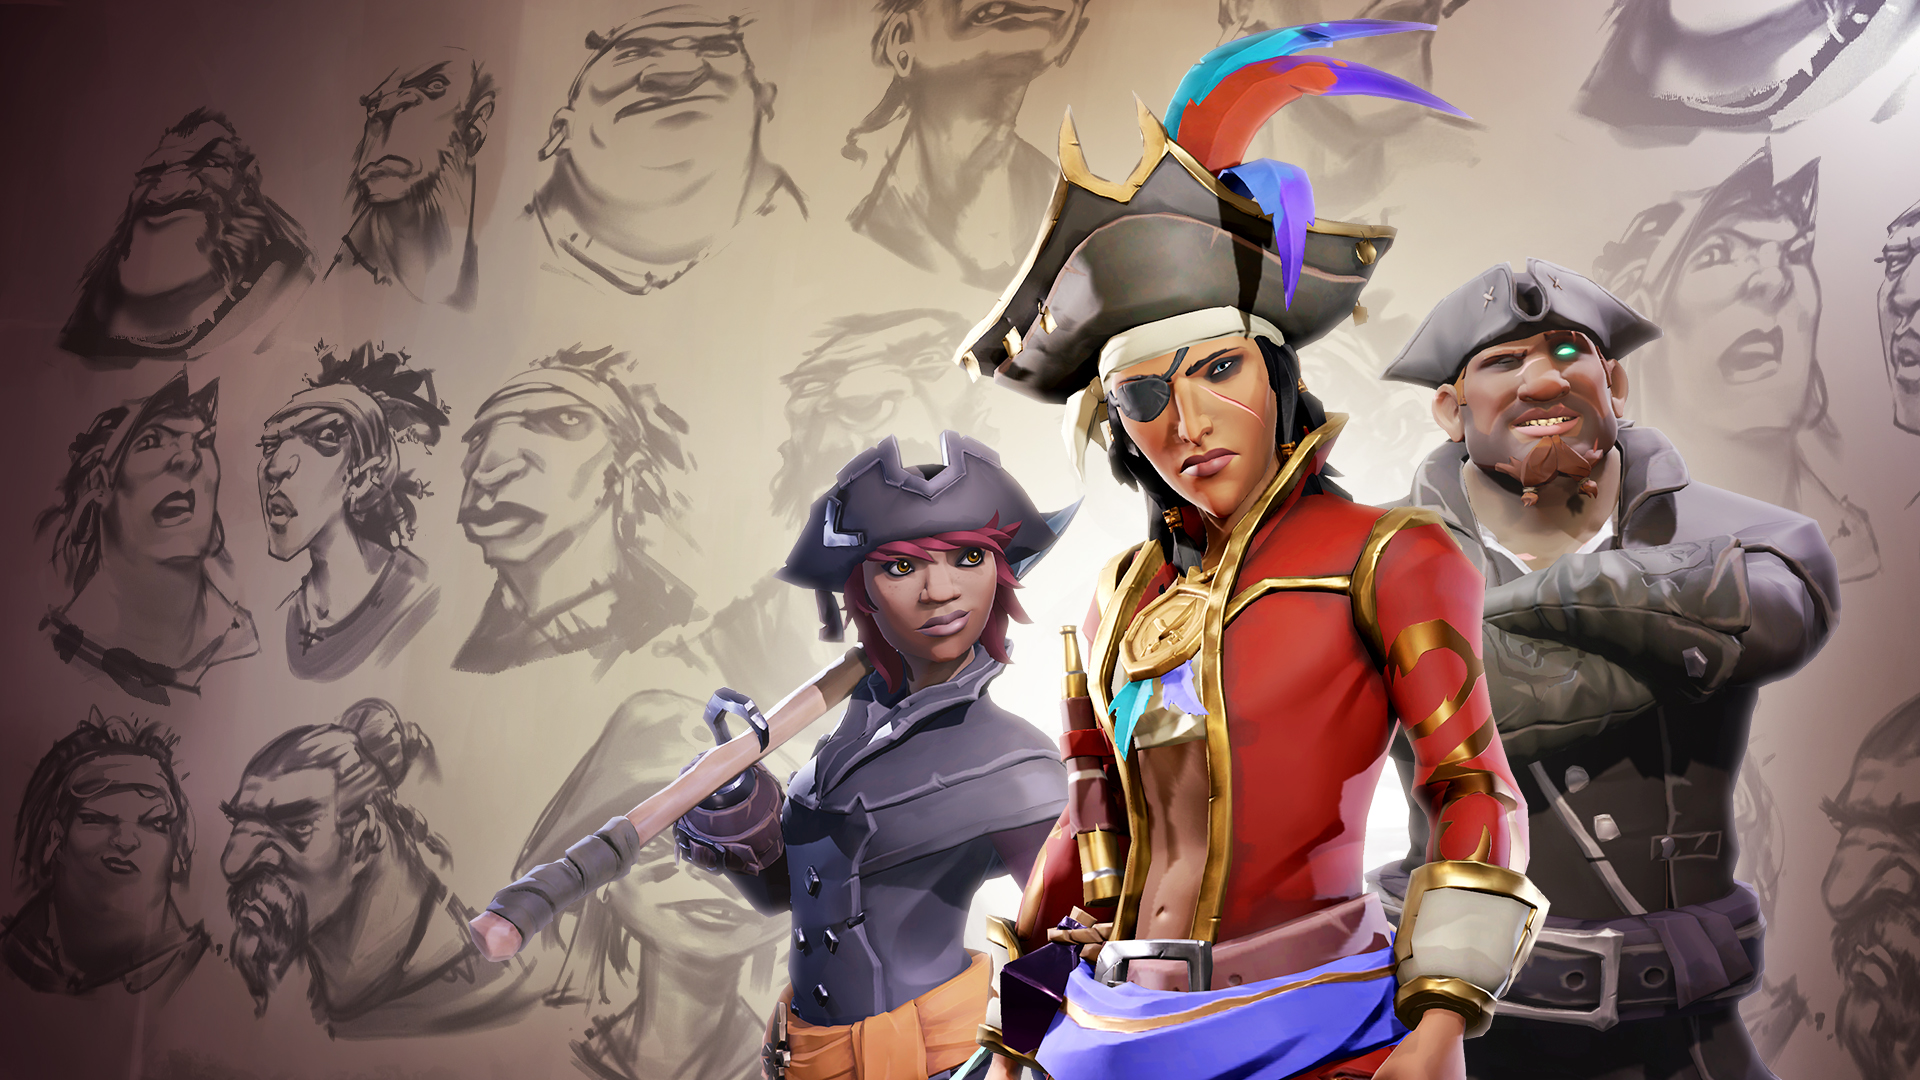 Fight for Your Faction in Sea of Thieves Season Eight - Xbox Wire